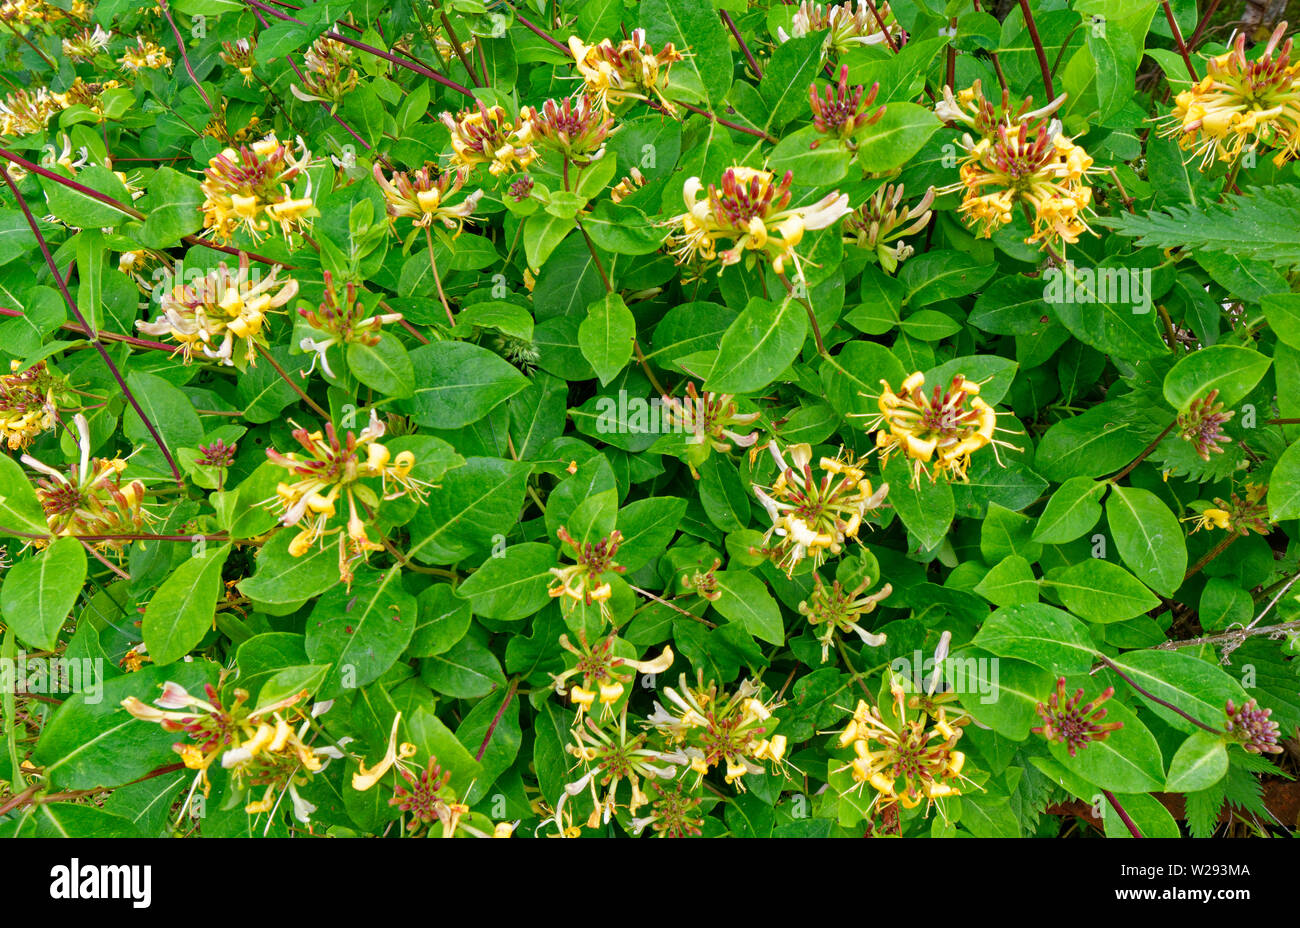 SPEYSIDE WAY SCOTLAND MANY FLOWERS OF THE WILD HONEYSUCKLE Lonicera periclymenum GROWING IN A HEDGE IN SUMMER Stock Photo